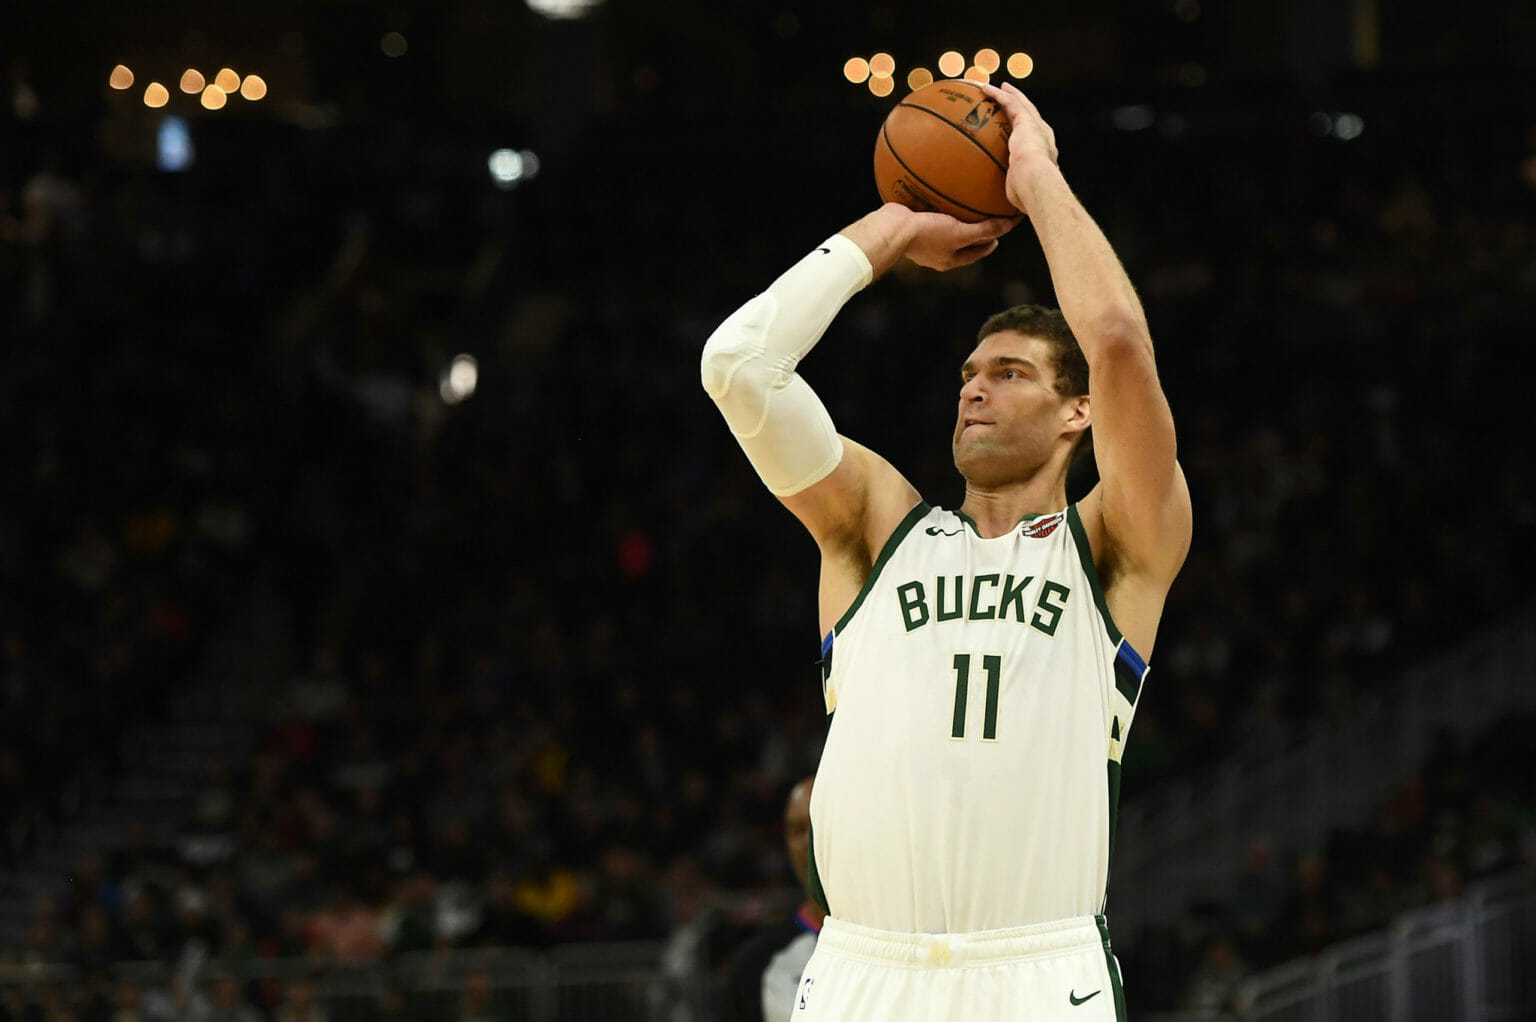 MILWAUKEE, WISCONSIN - NOVEMBER 25: Brook Lopez #11 of the Milwaukee Bucks takes a three point shot during a game against the Utah Jazz at Fiserv Forum on November 25, 2019 in Milwaukee, Wisconsin. NOTE TO USER: User expressly acknowledges and agrees that, by downloading and or using this photograph, User is consenting to the terms and conditions of the Getty Images License Agreement. (Photo by Stacy Revere/Getty Images) (NBA Rumors)